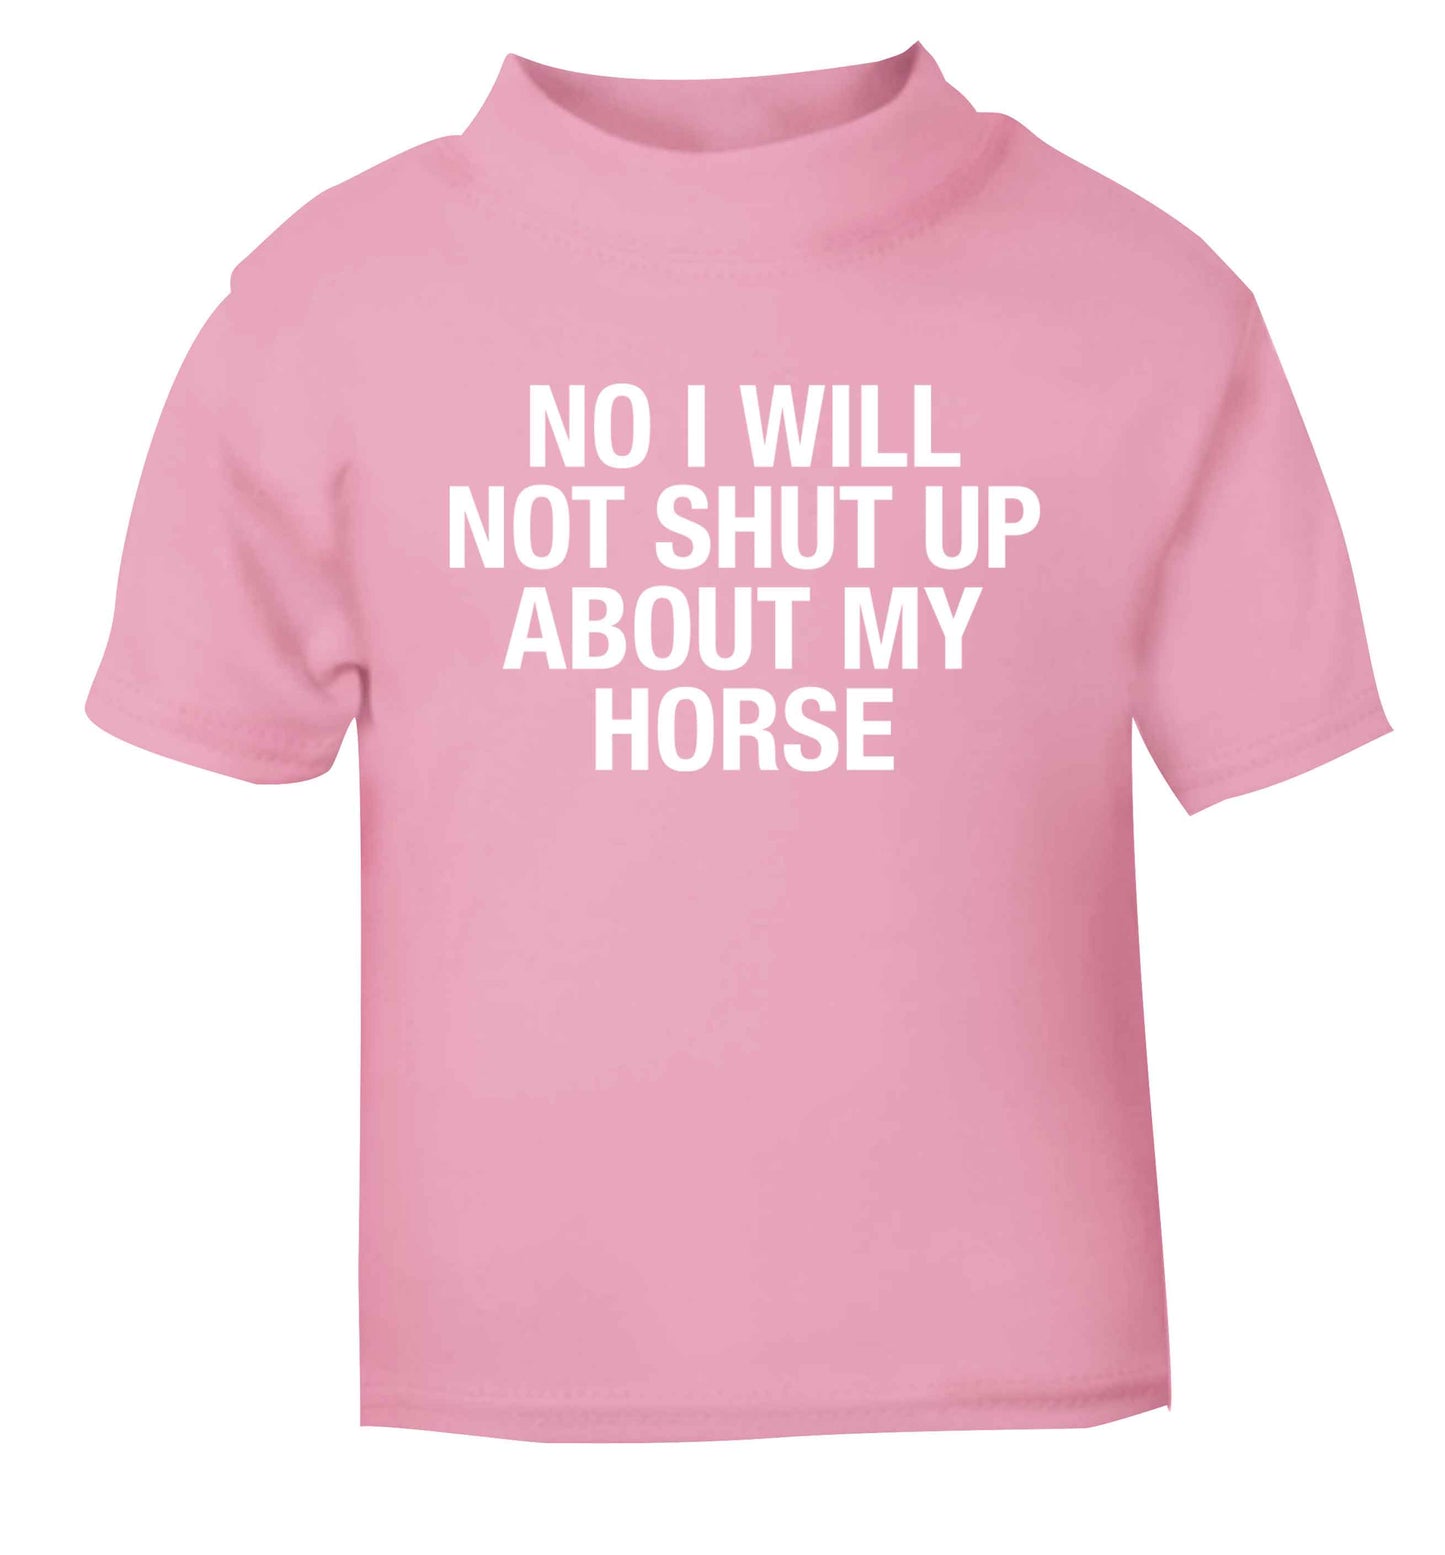 No I will not shut up talking about my horse light pink baby toddler Tshirt 2 Years